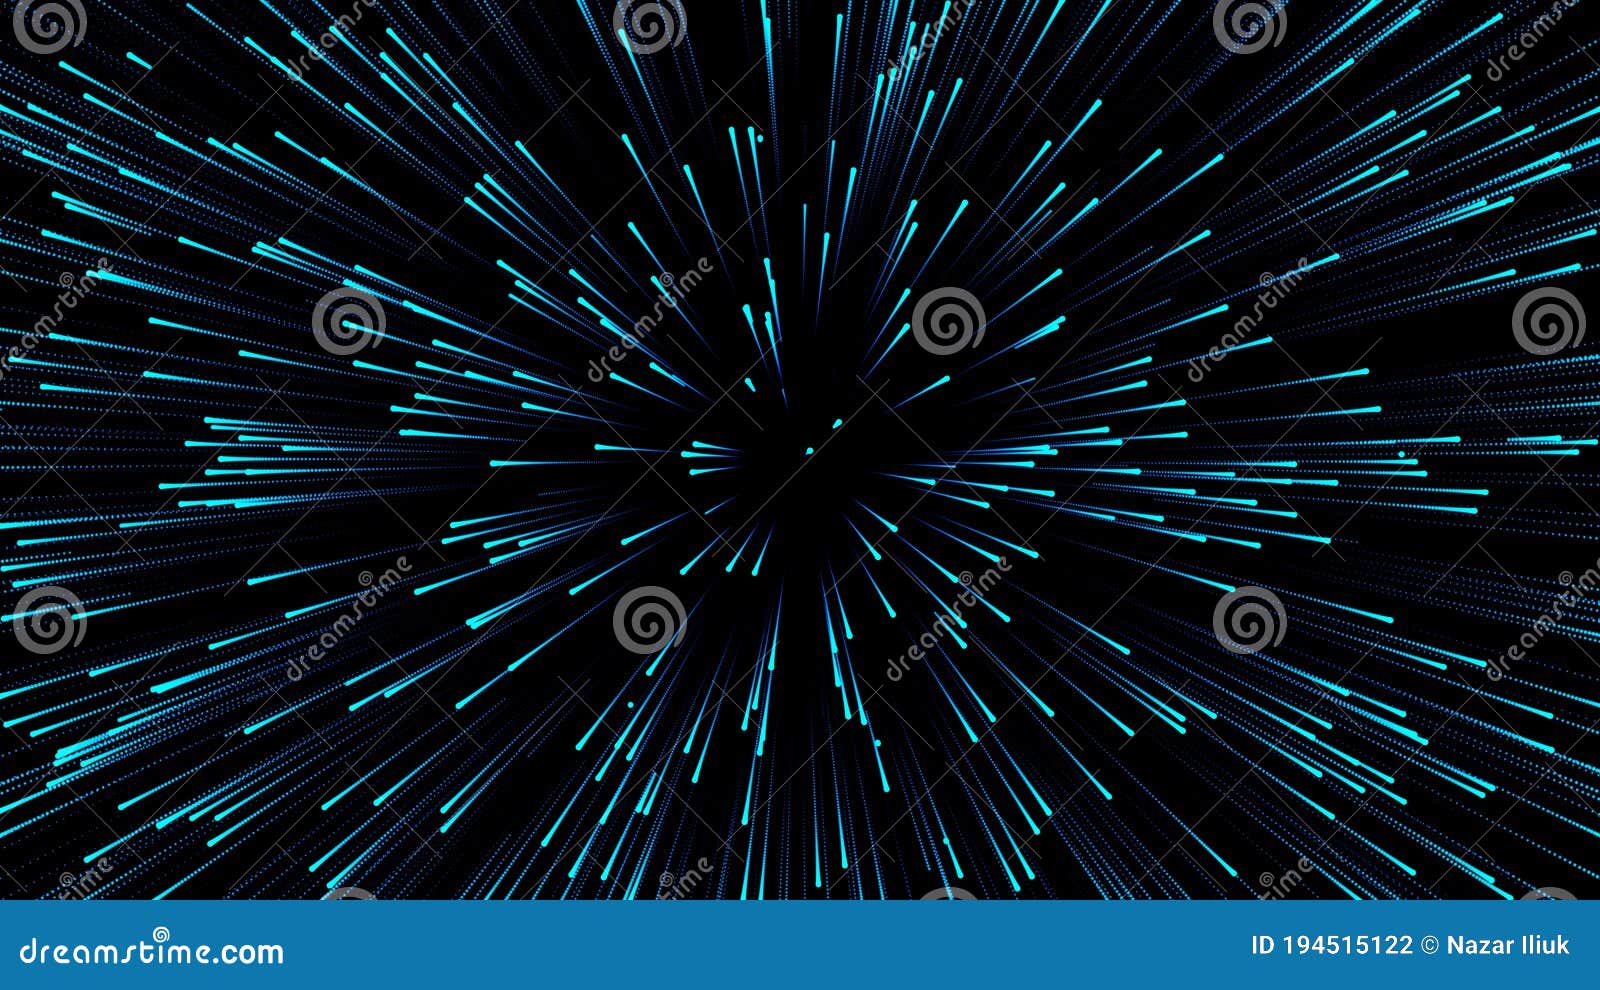 hyperjump in space. speed of light star wars. particle flow. 3d rendering